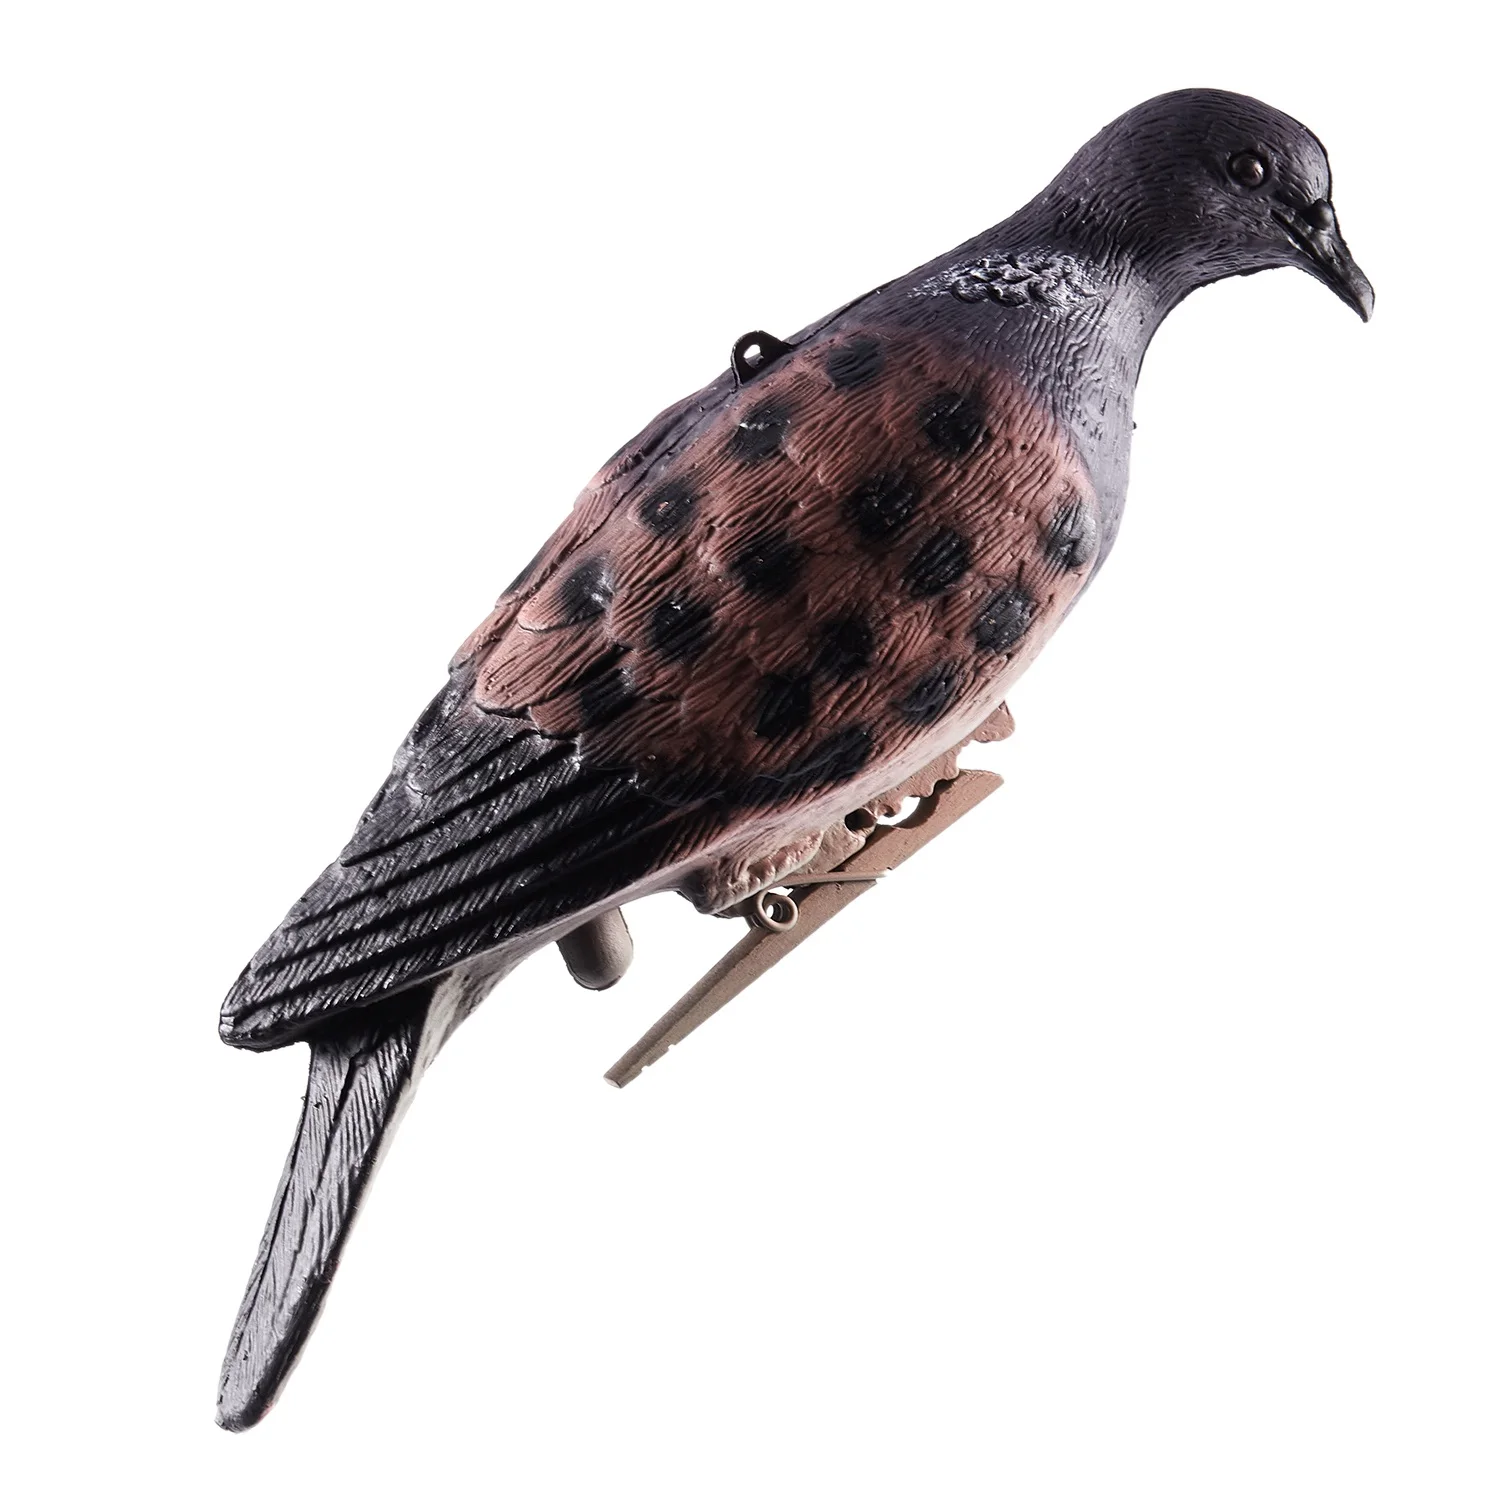 

1PC Hunting Dove Scare Protect Garden Pigeon Decoy Bionic Animal Bait Outdoor Hunting Birds Decoy Accessory